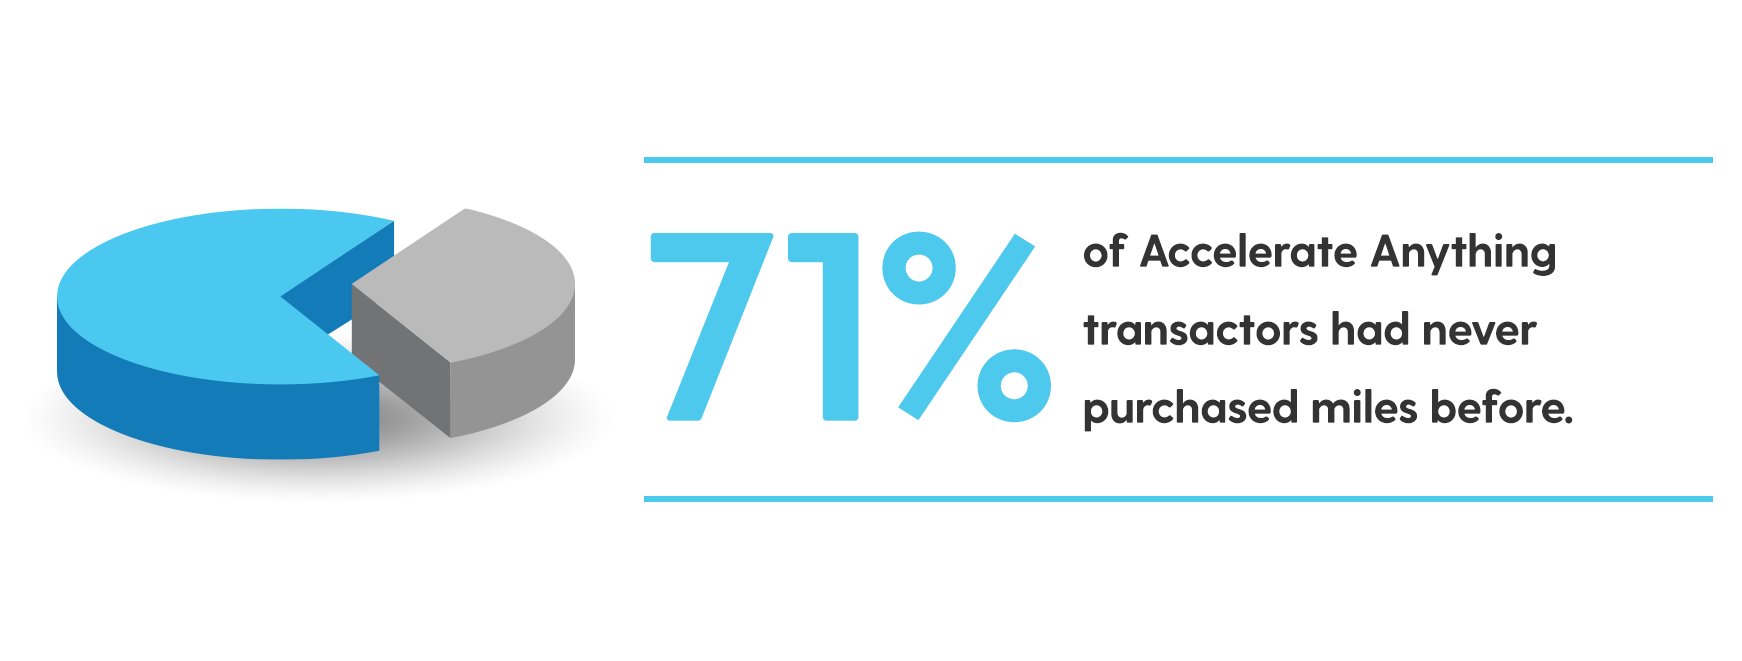 Seventy-one percent of Accelerate Anything transactors never purchased miles before.